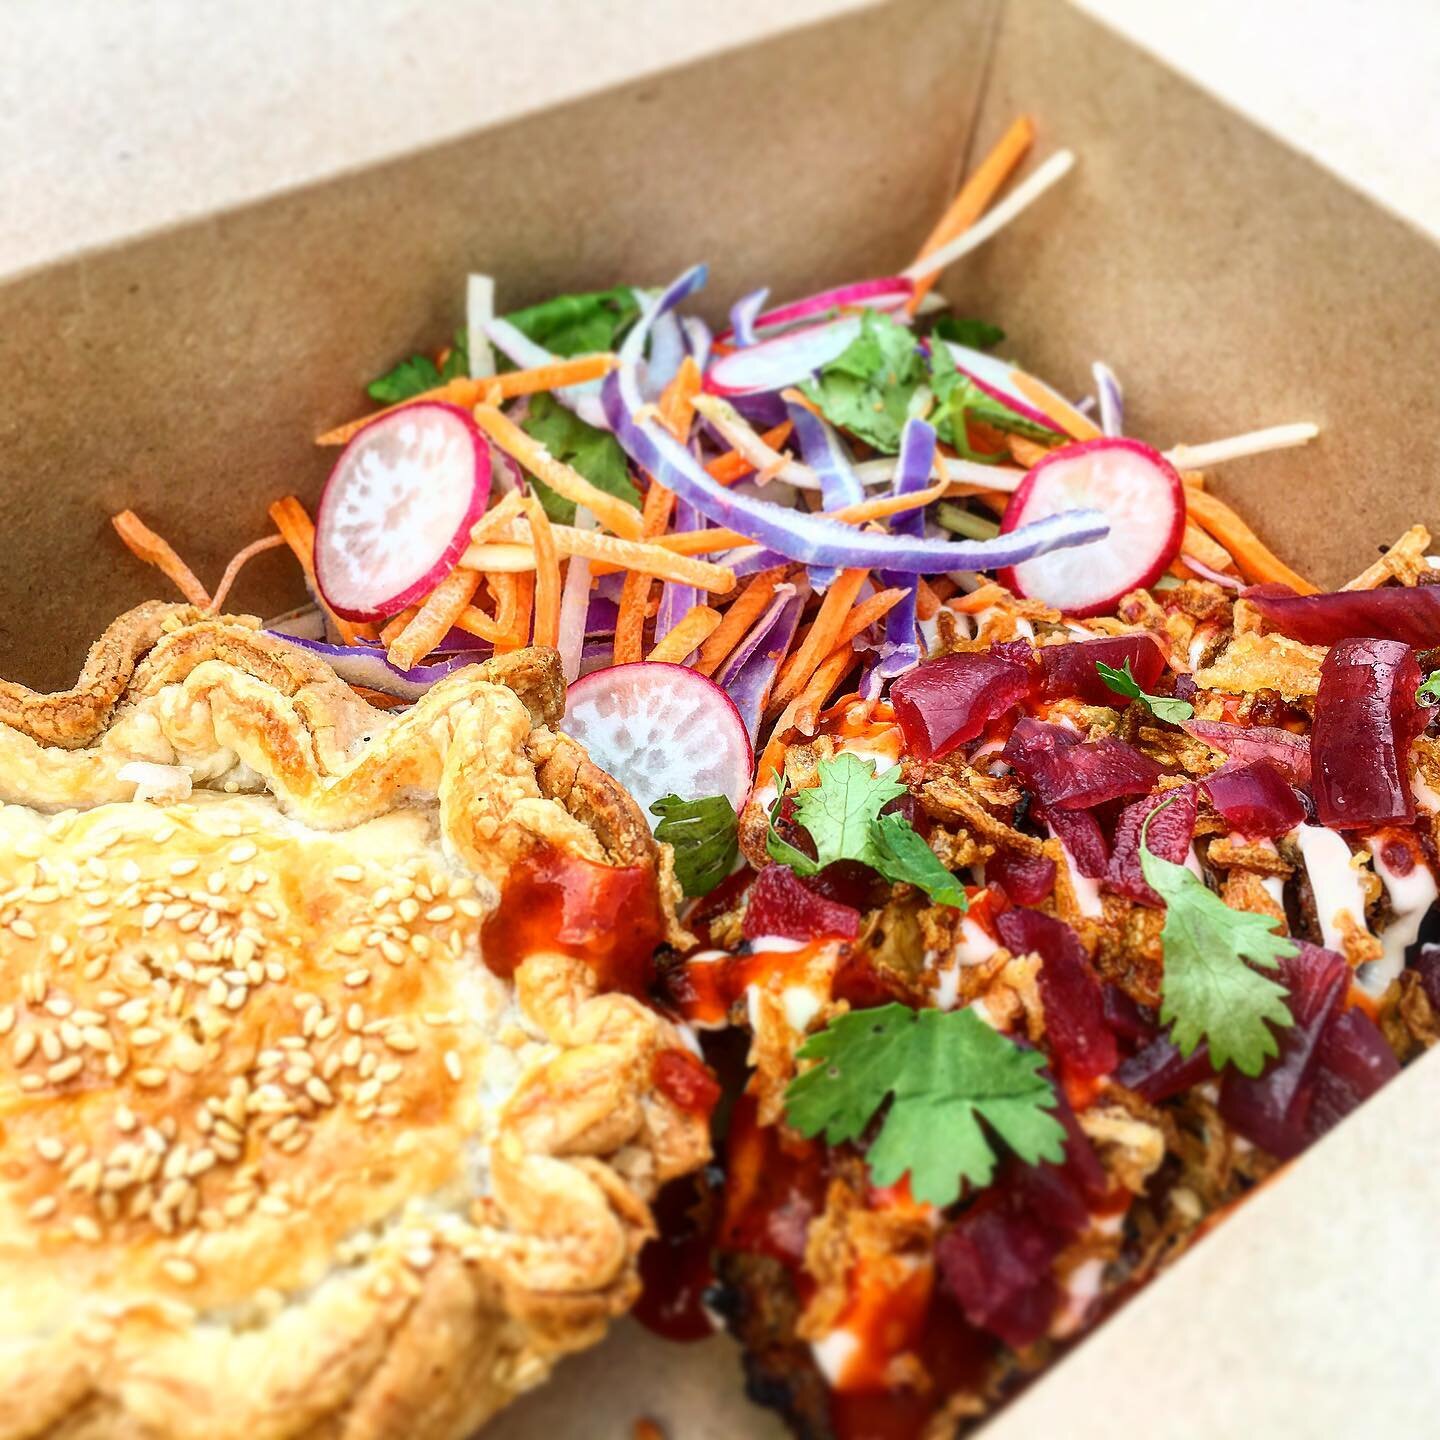 Pie, spuds and slaw - ultimate trio! Boxes take away vibes.
When we pop up in companies offices to give the team an exciting lunch we bring everyone together to take five. Nothing gets people of their chair and socialising like a pop-up lunch.
.
.
.
